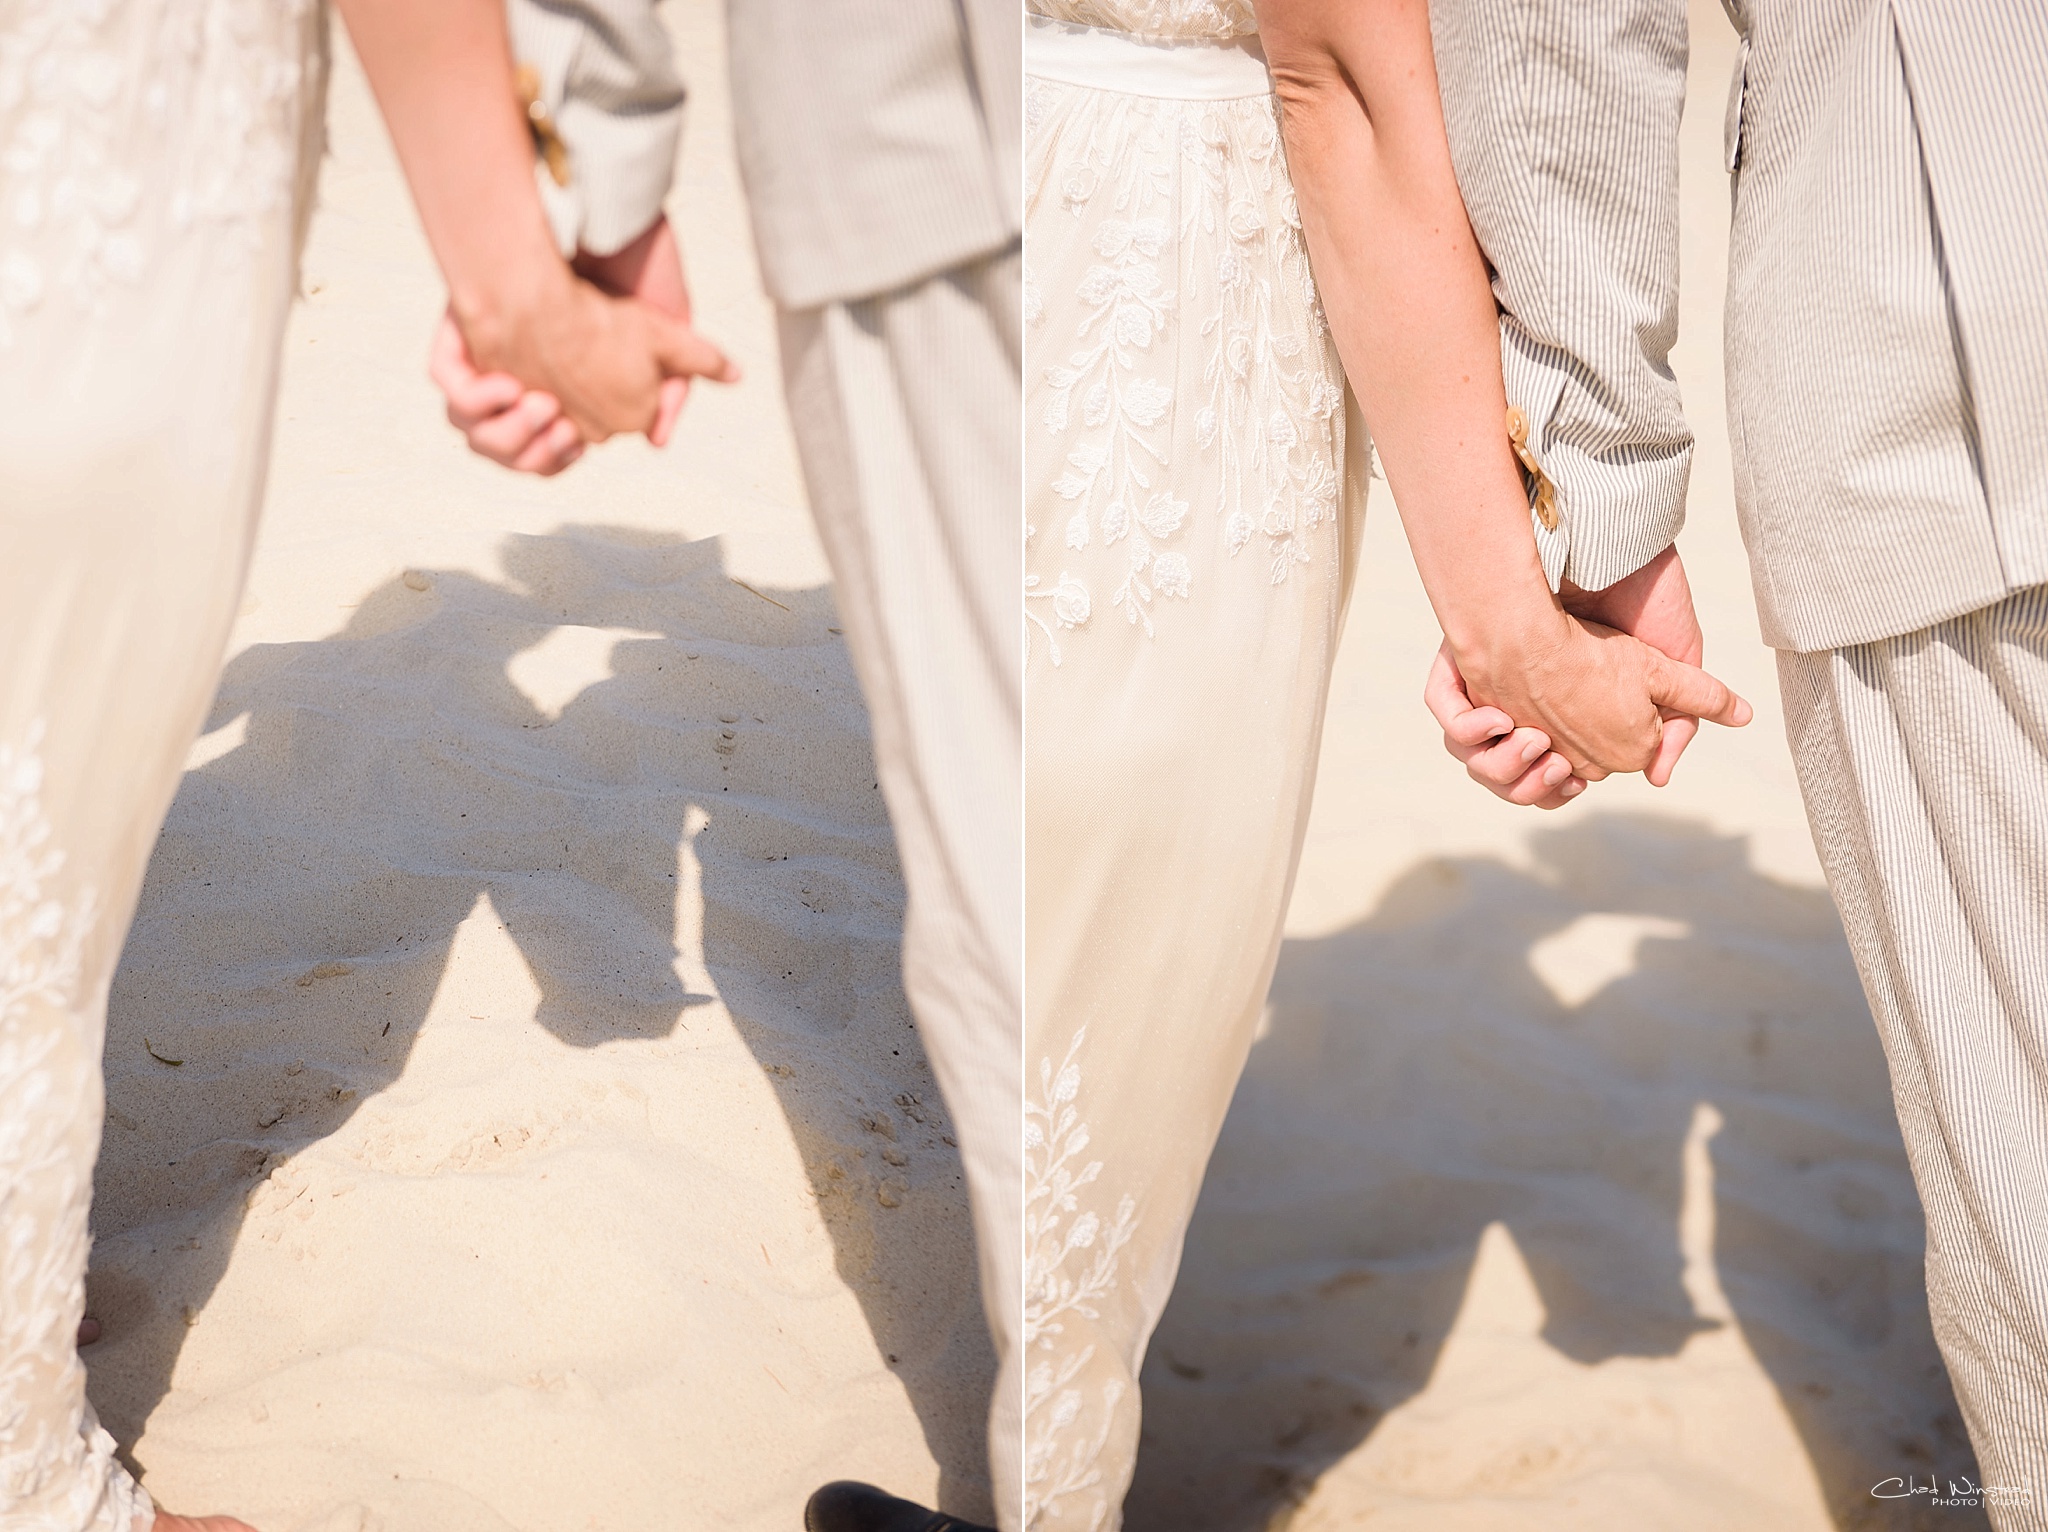  Tiffany & Justin's Wedding at the Islander Hotel and Suites in Emerald Isle, NC by Chad Winstead Photography 